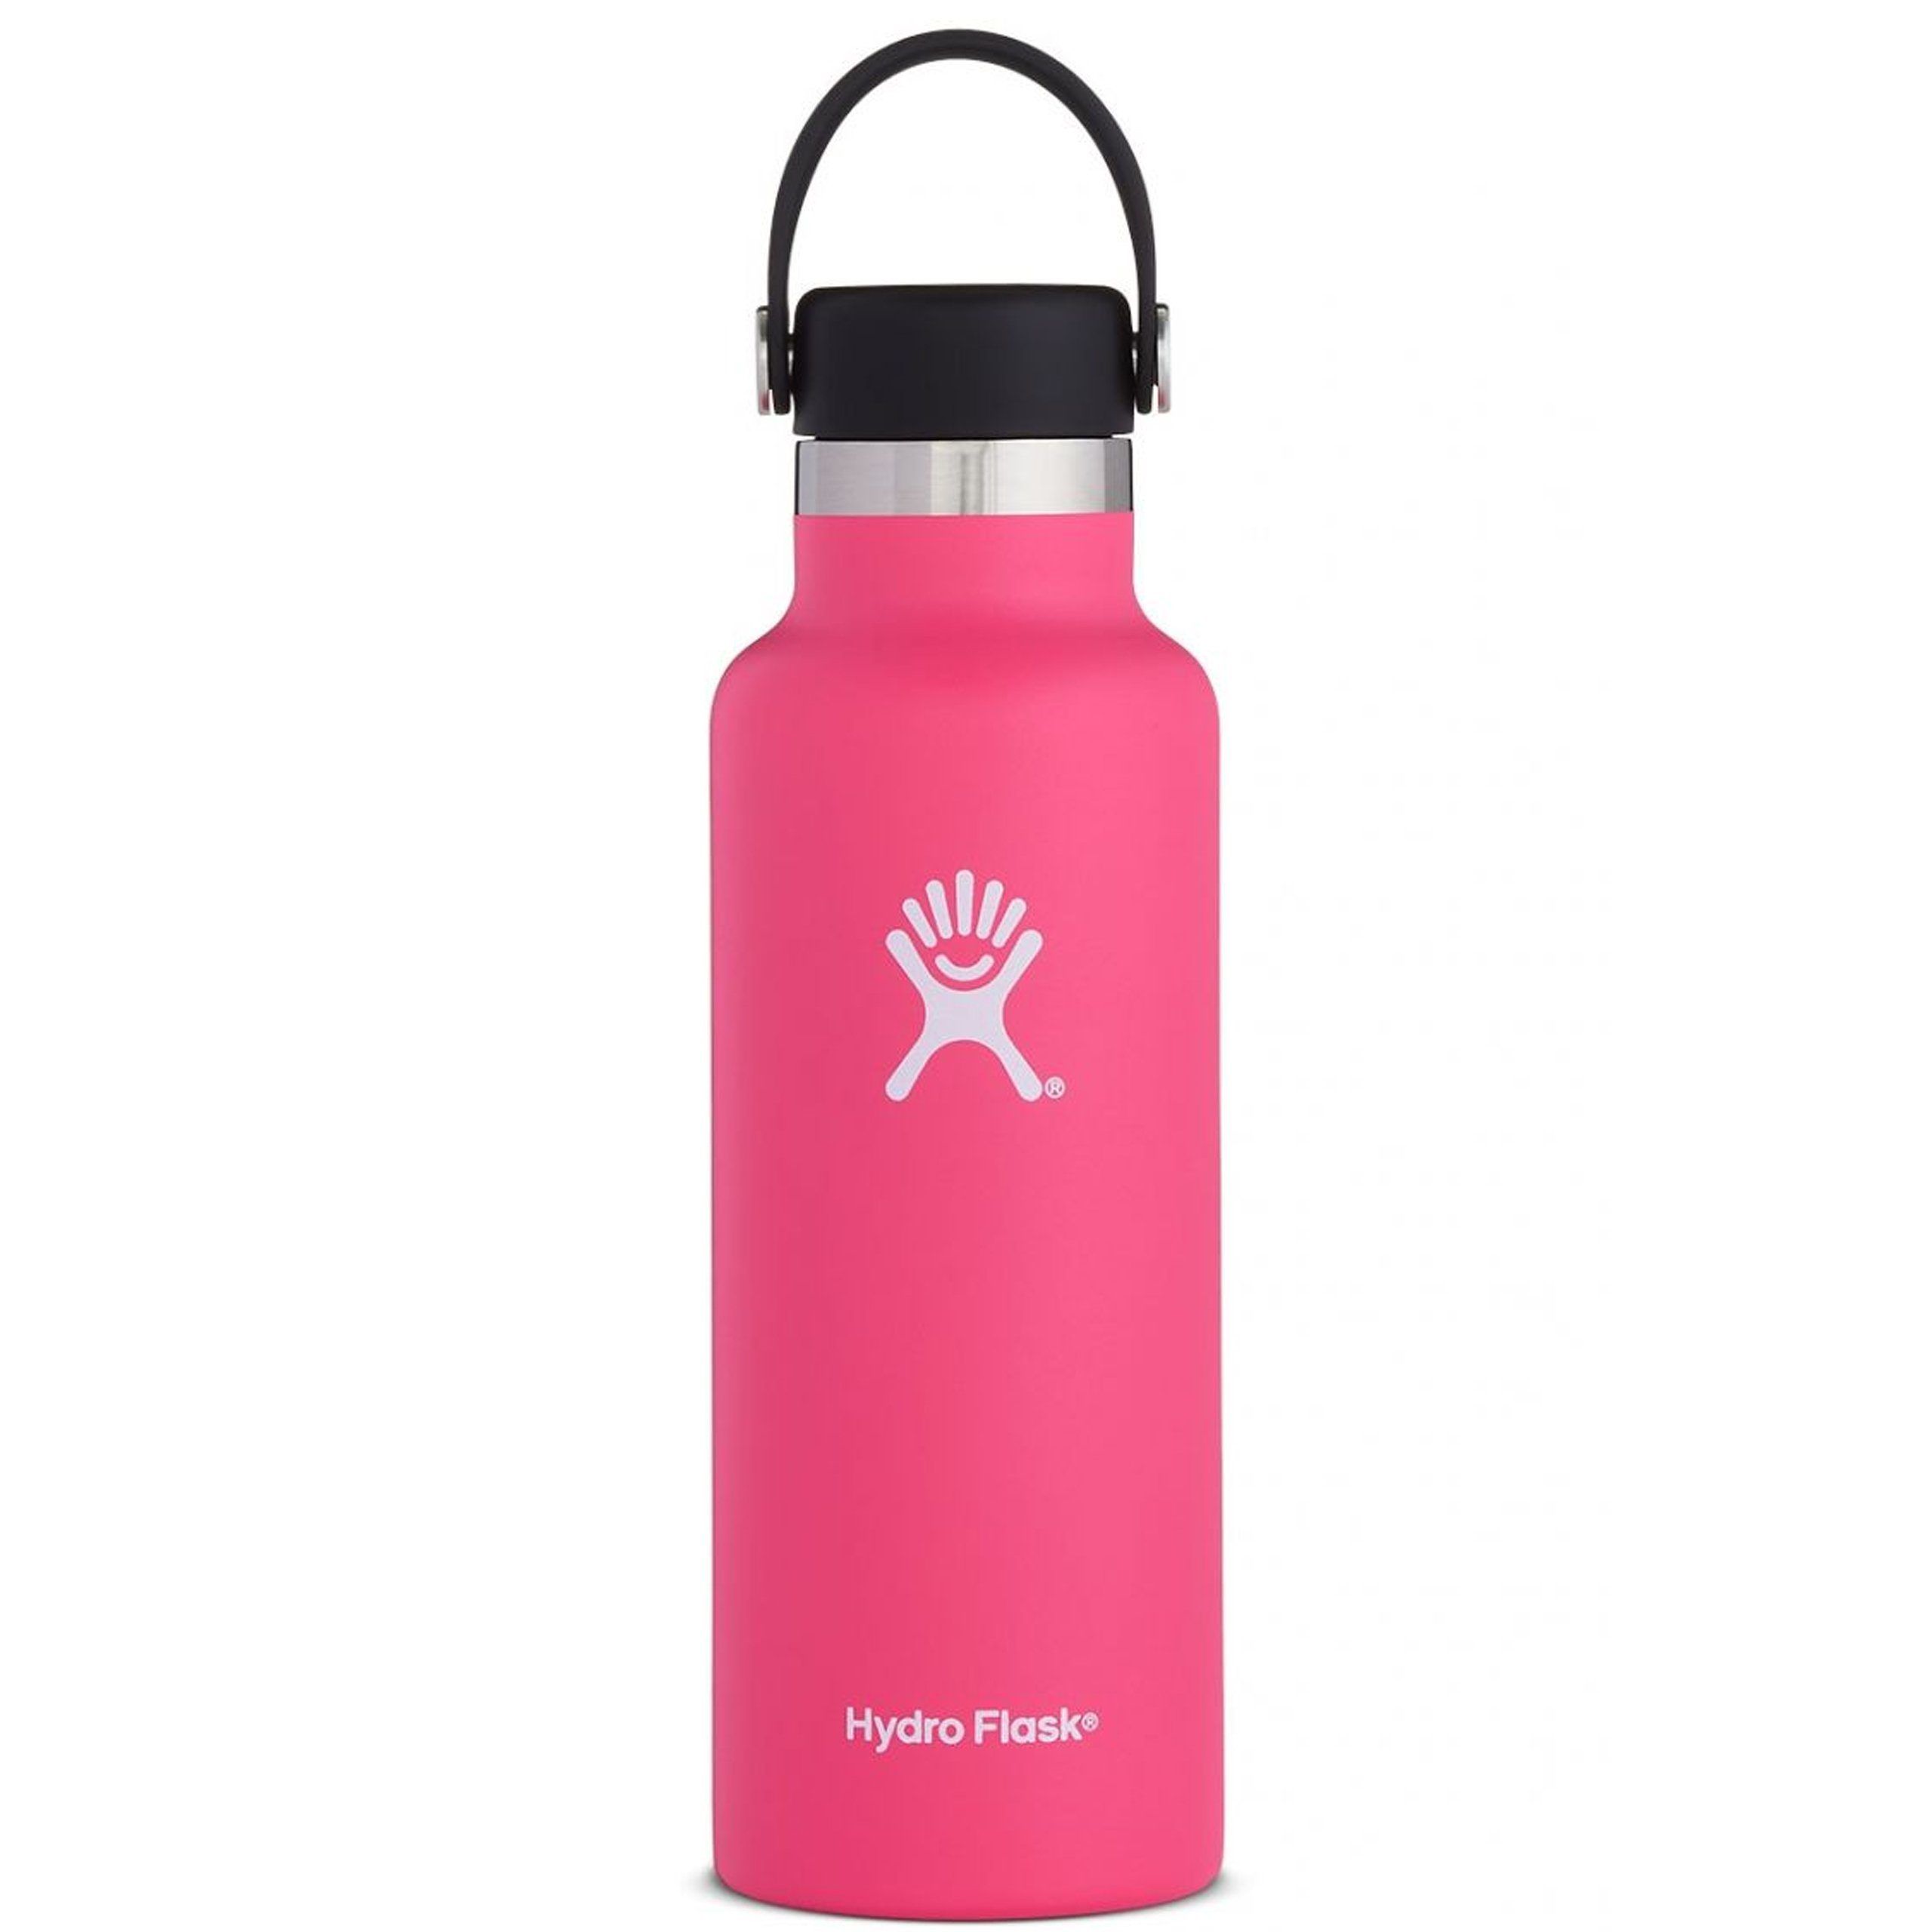 Hydro Flask Isolierflasche Hydro Flask Bottle Standard Mouth - Isolierflasche/Thermoflasche carnation